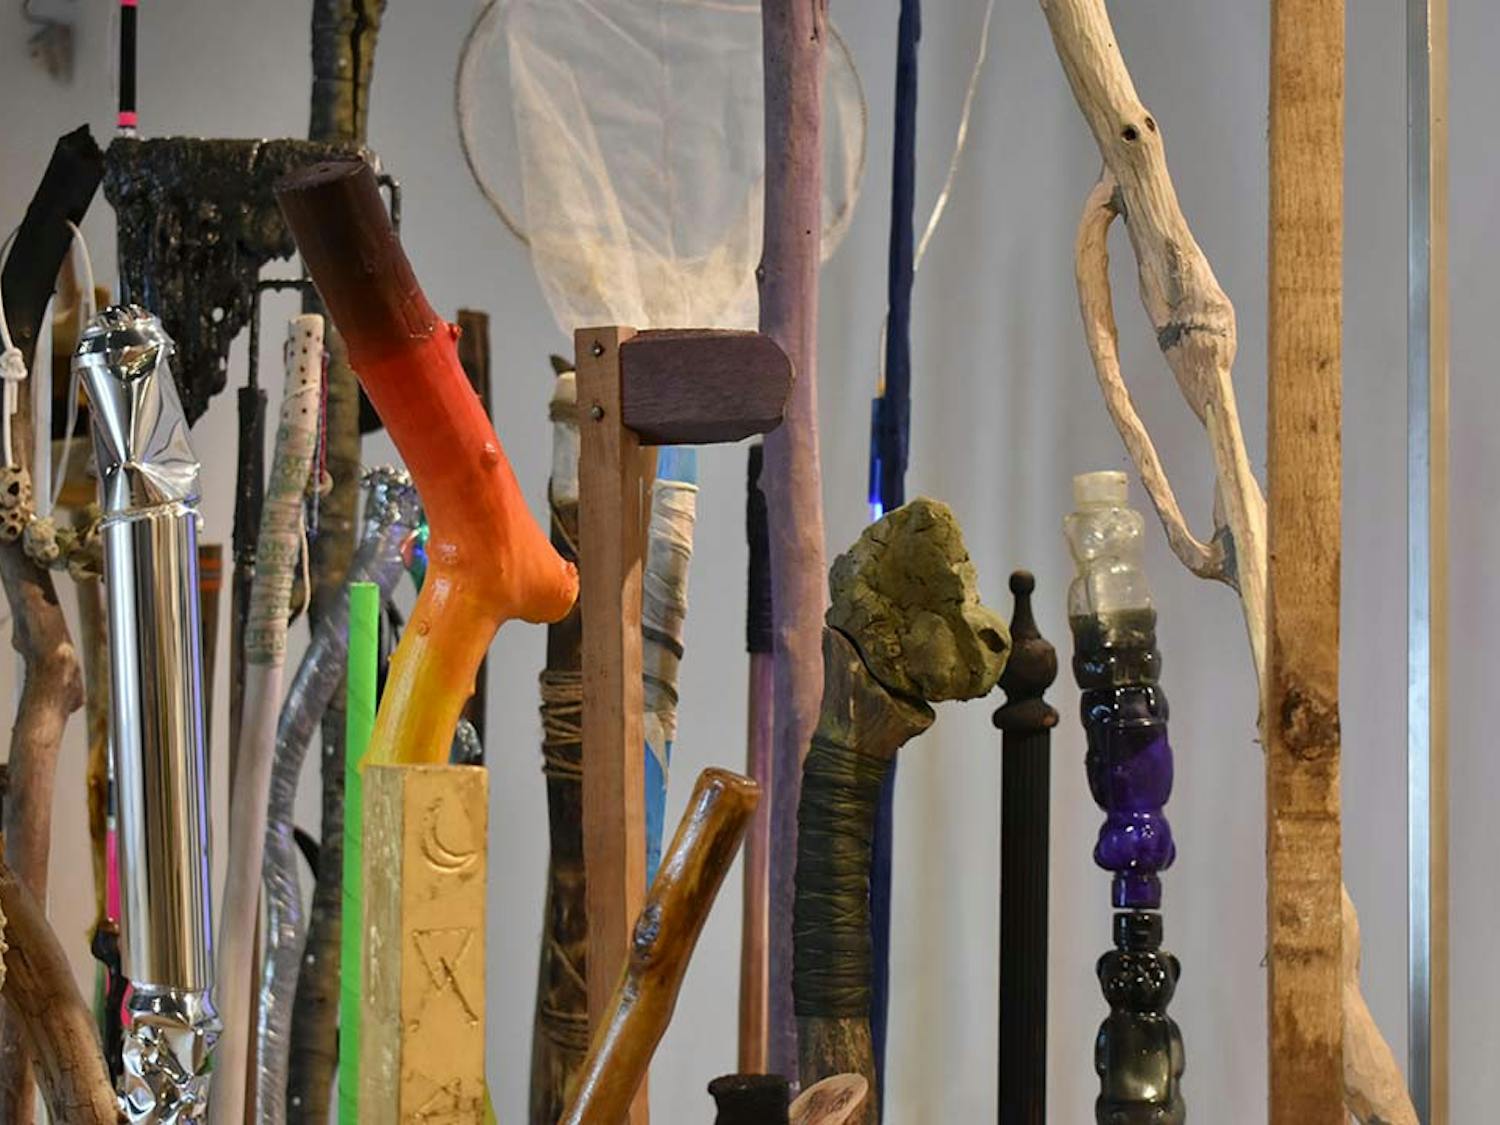 "Drifter History" by Christopher Mahonski is a collection of found and fabricated walking sticks inserted into individual metal bases. Each individual stick is made of a unique material and distinctive style.